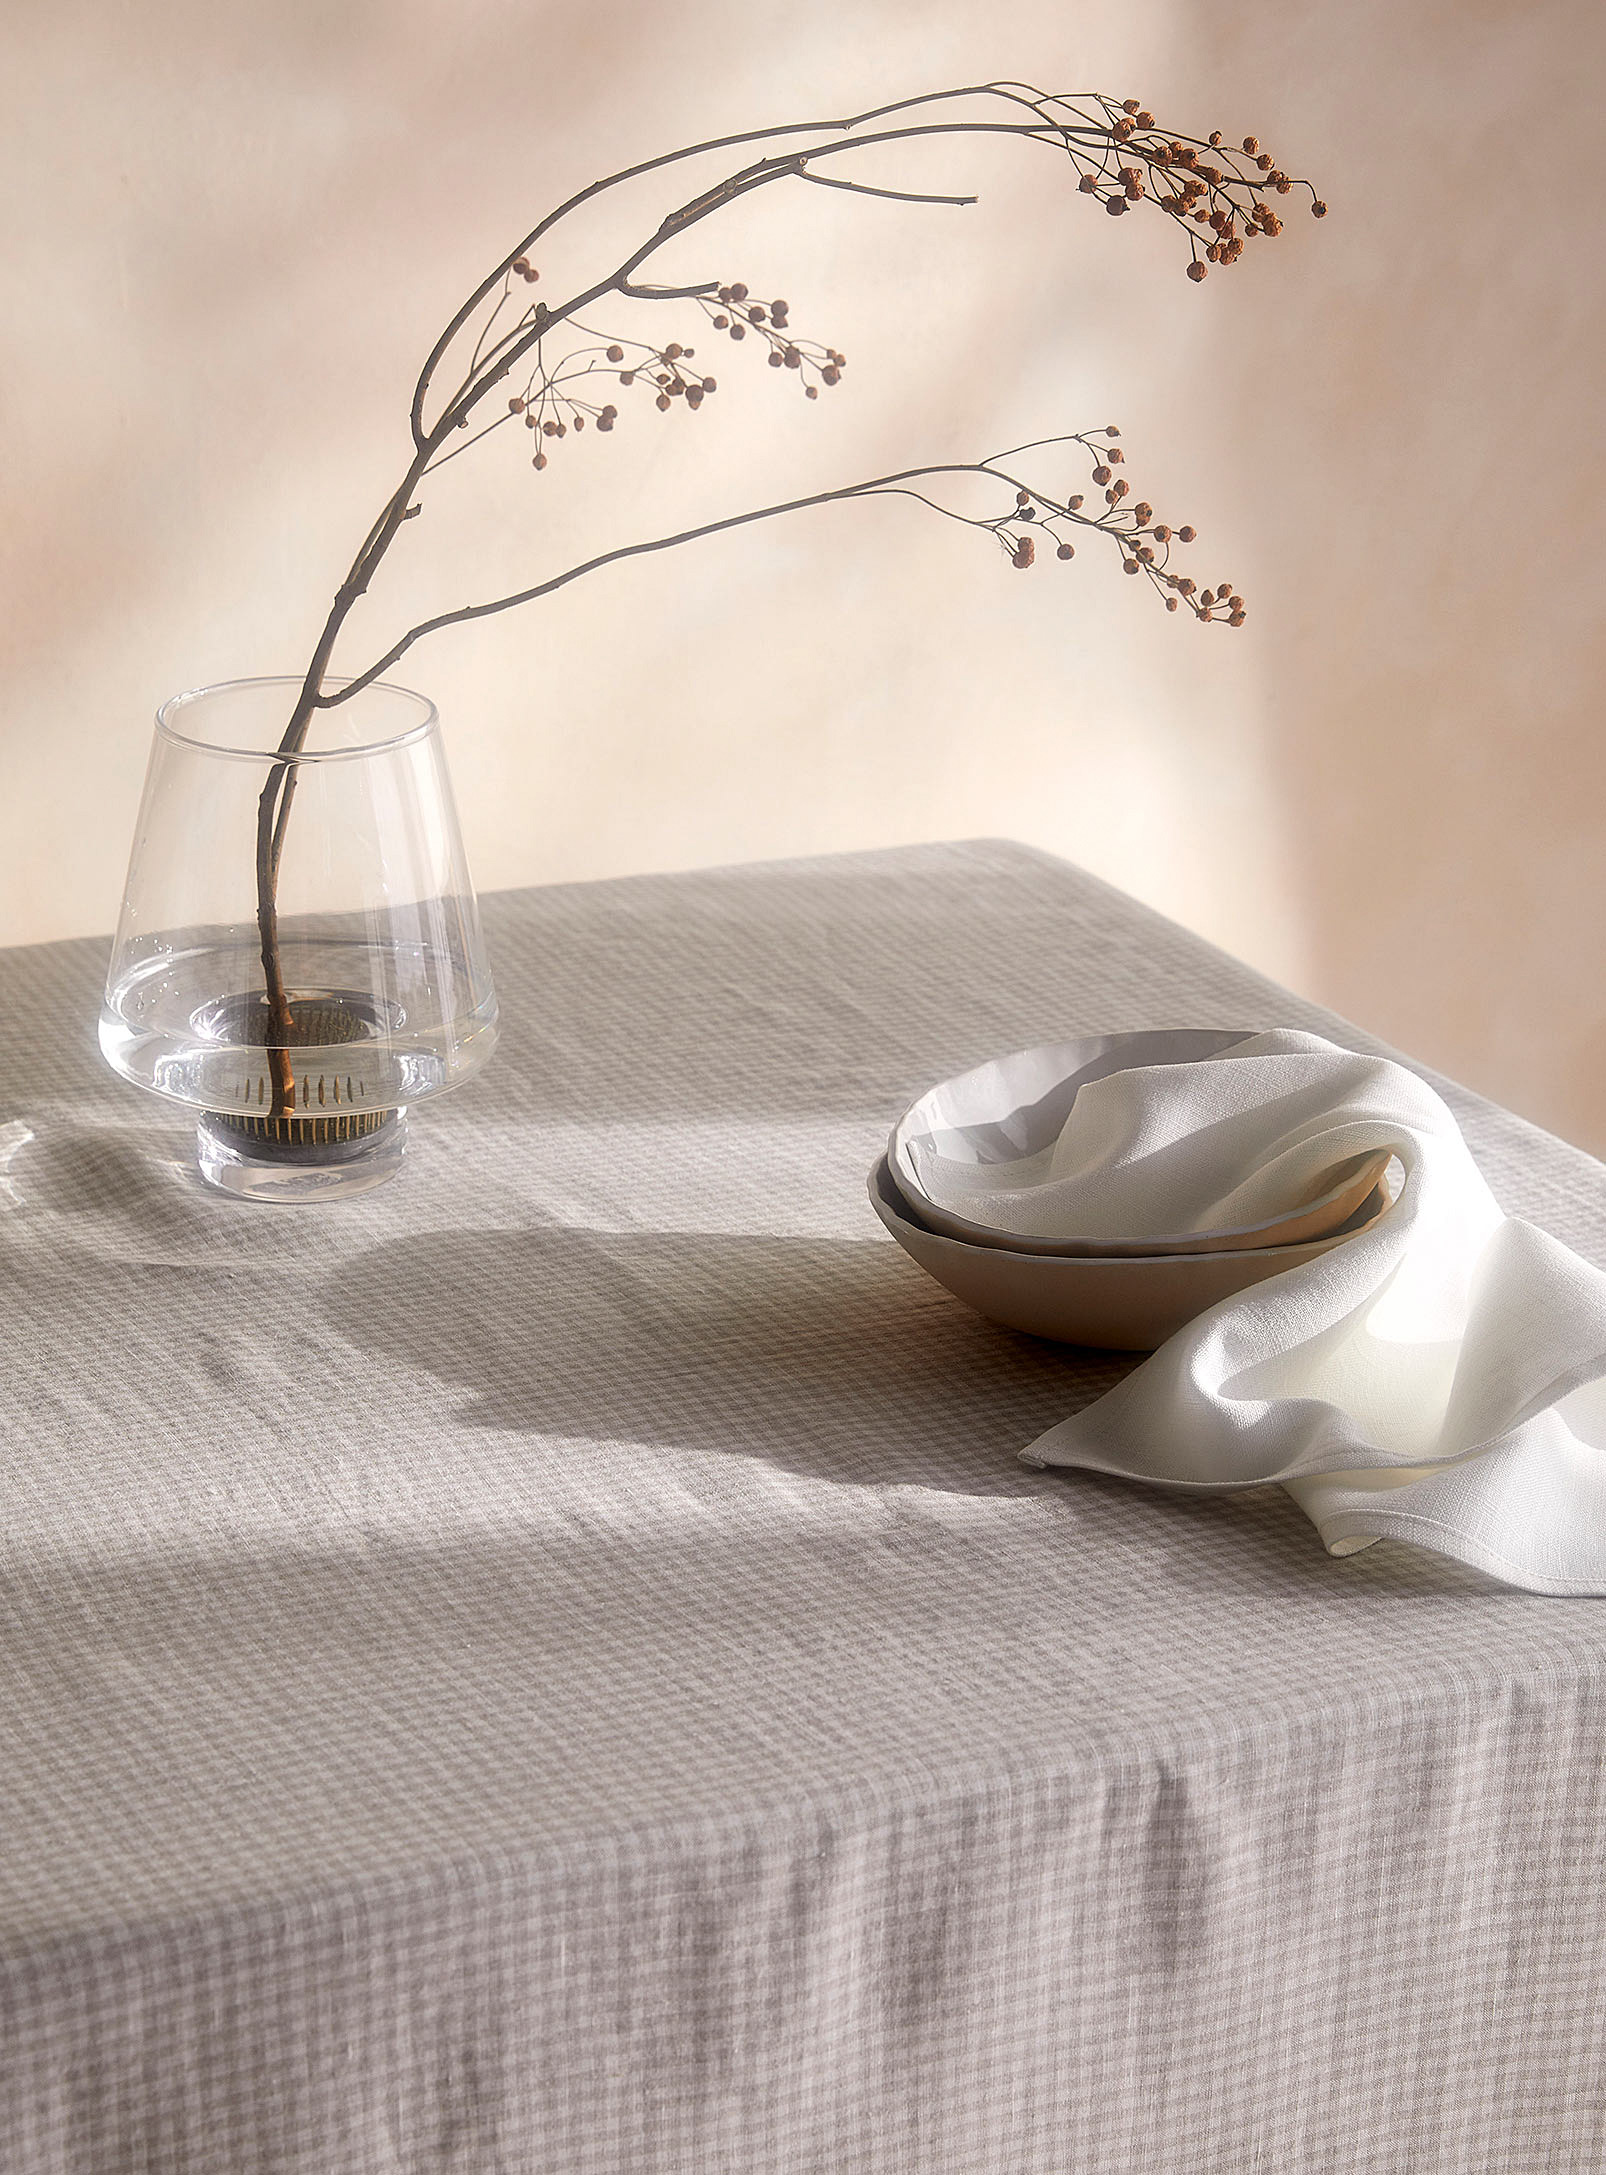 Casannita - Gingham checkered pattern pure linen square tablecloth For 4 people